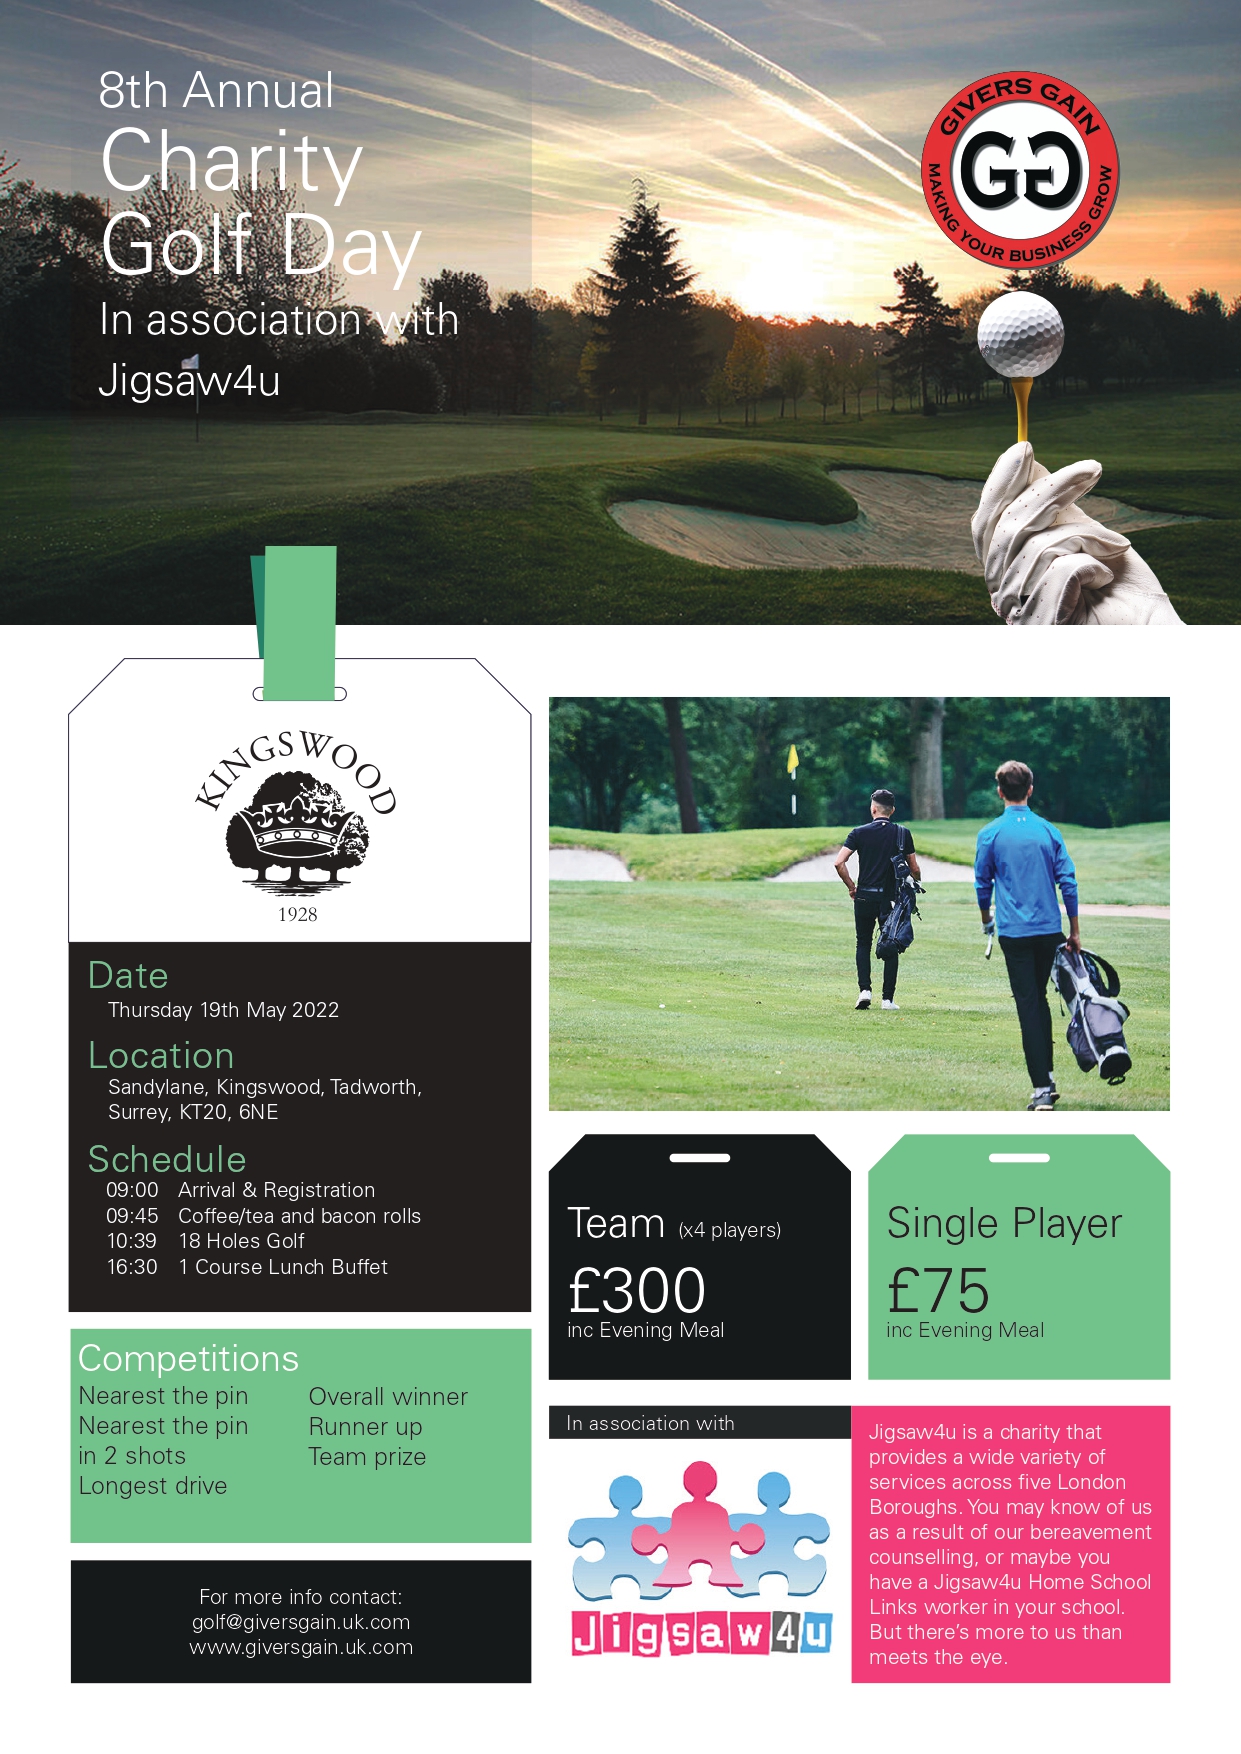 GGs Golf Day 2022 - Givers Gain